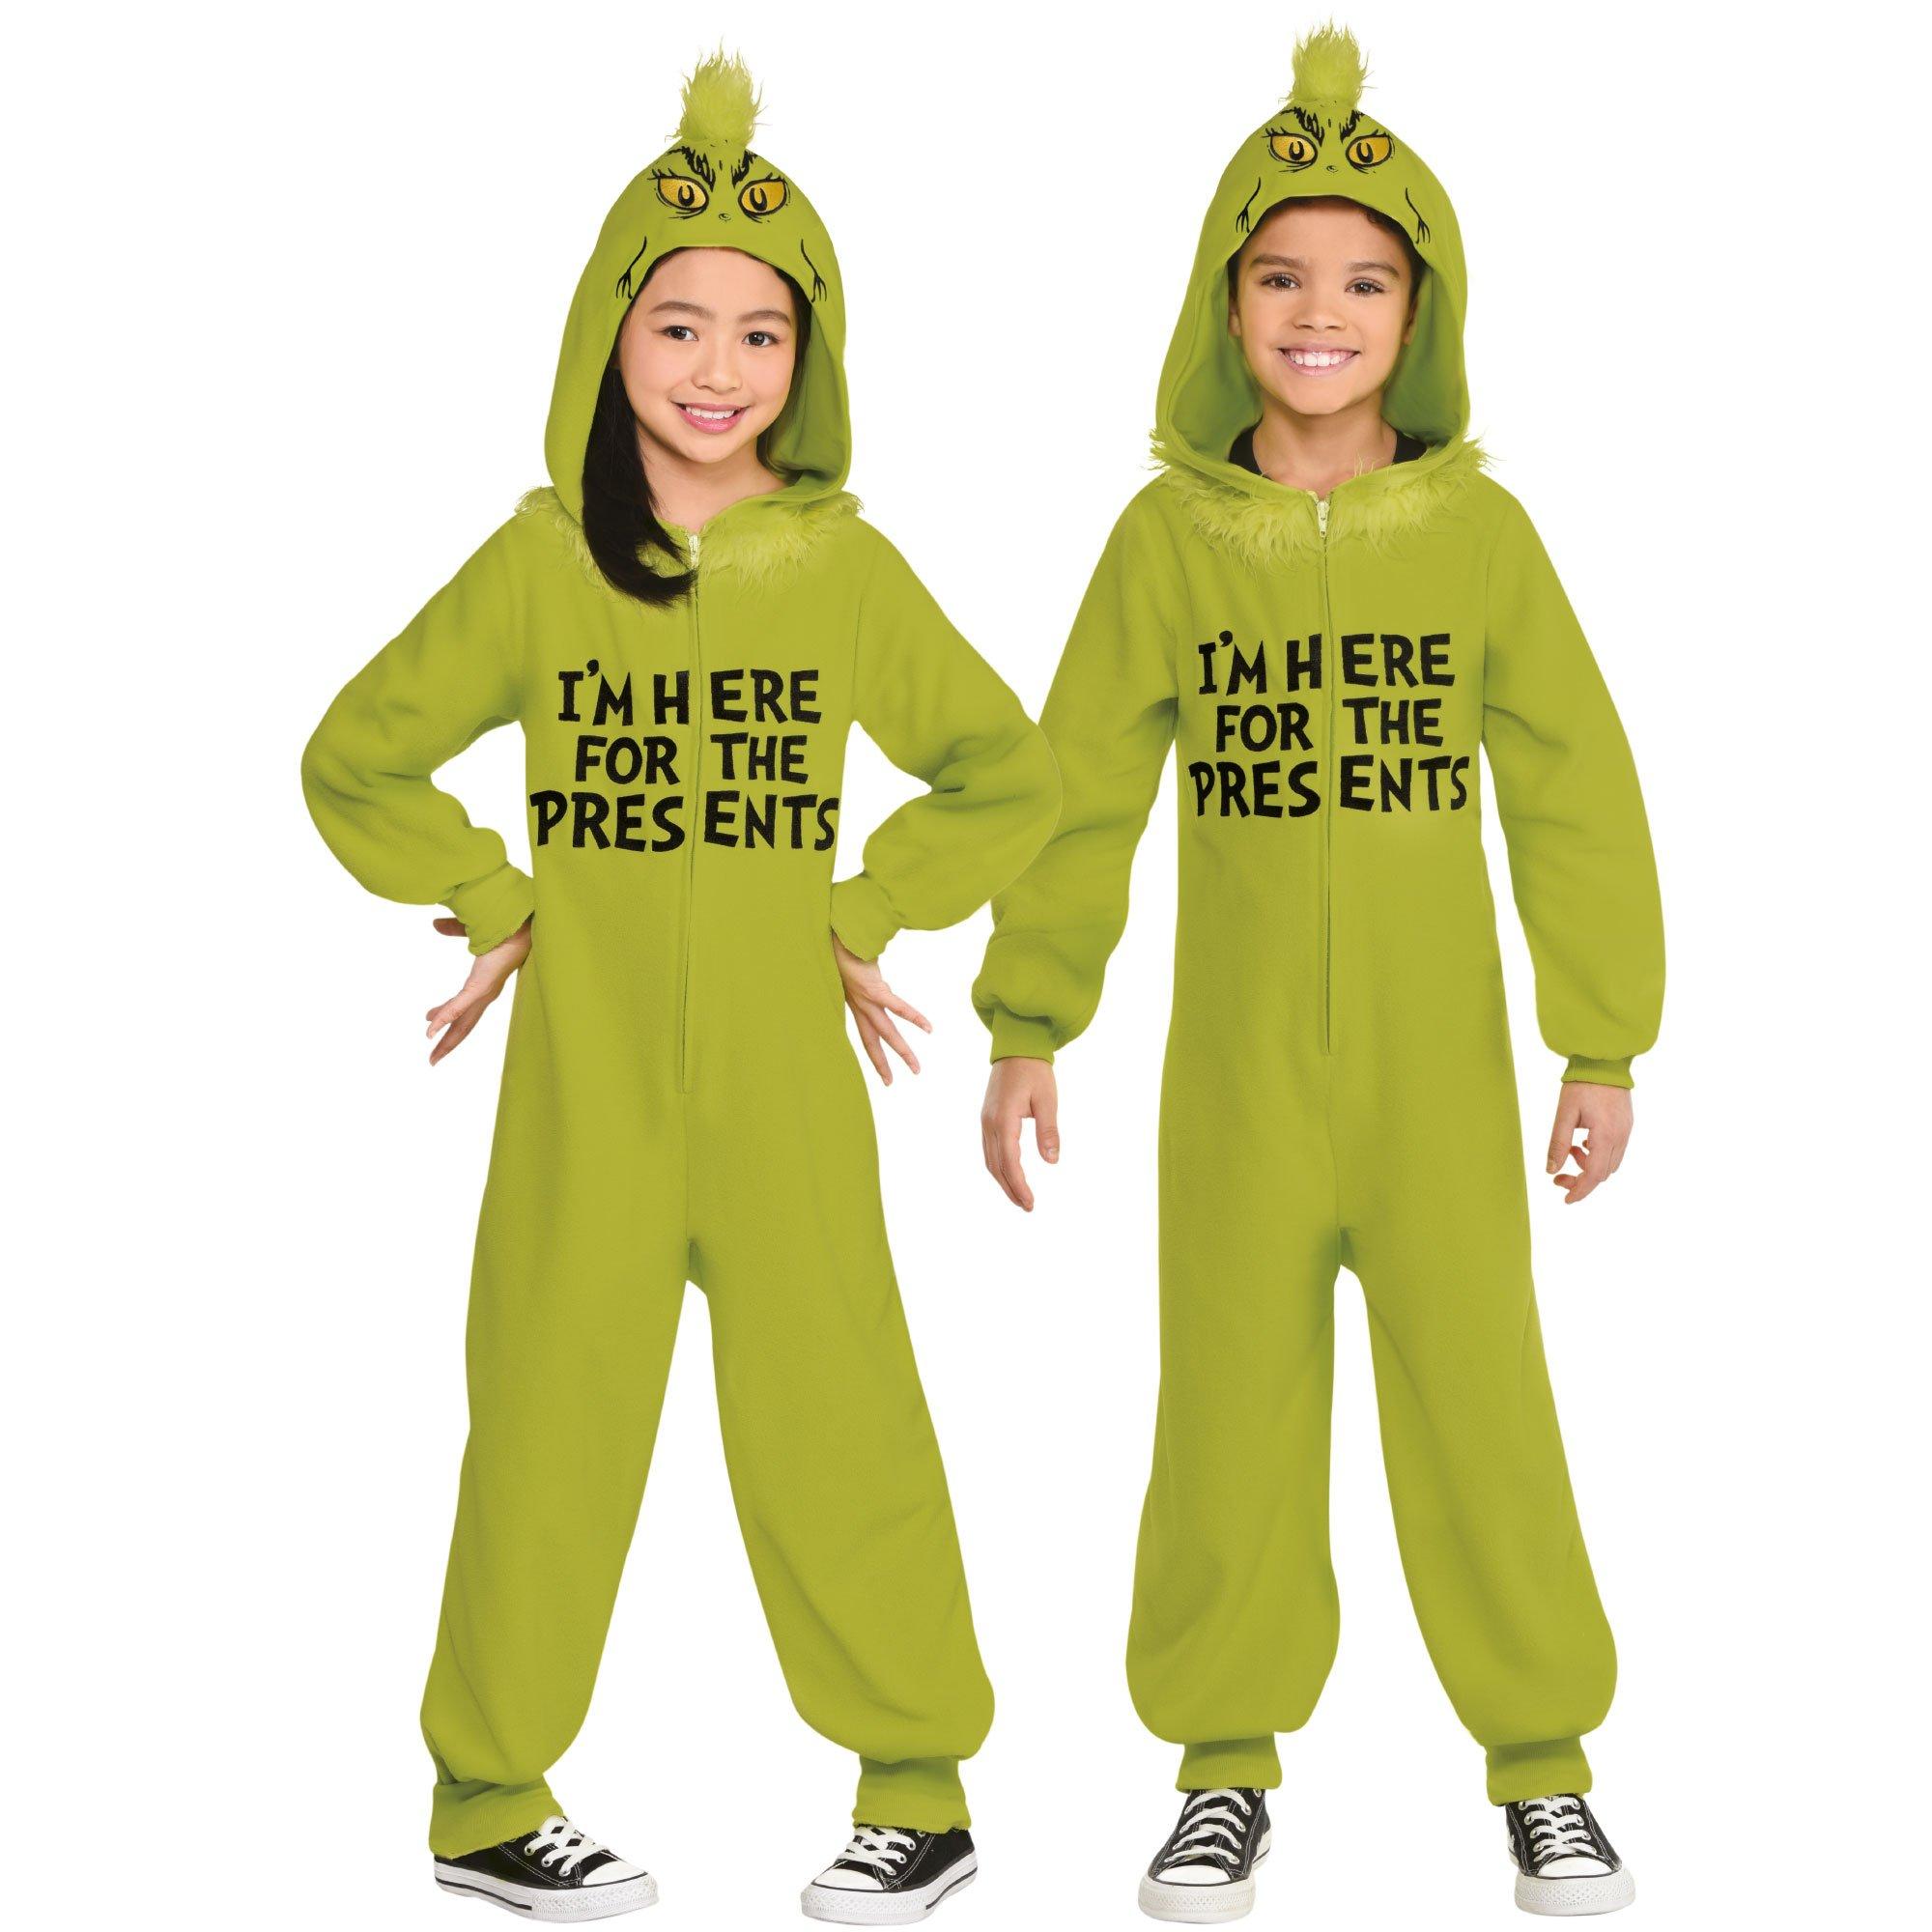 The Grinch costume for children